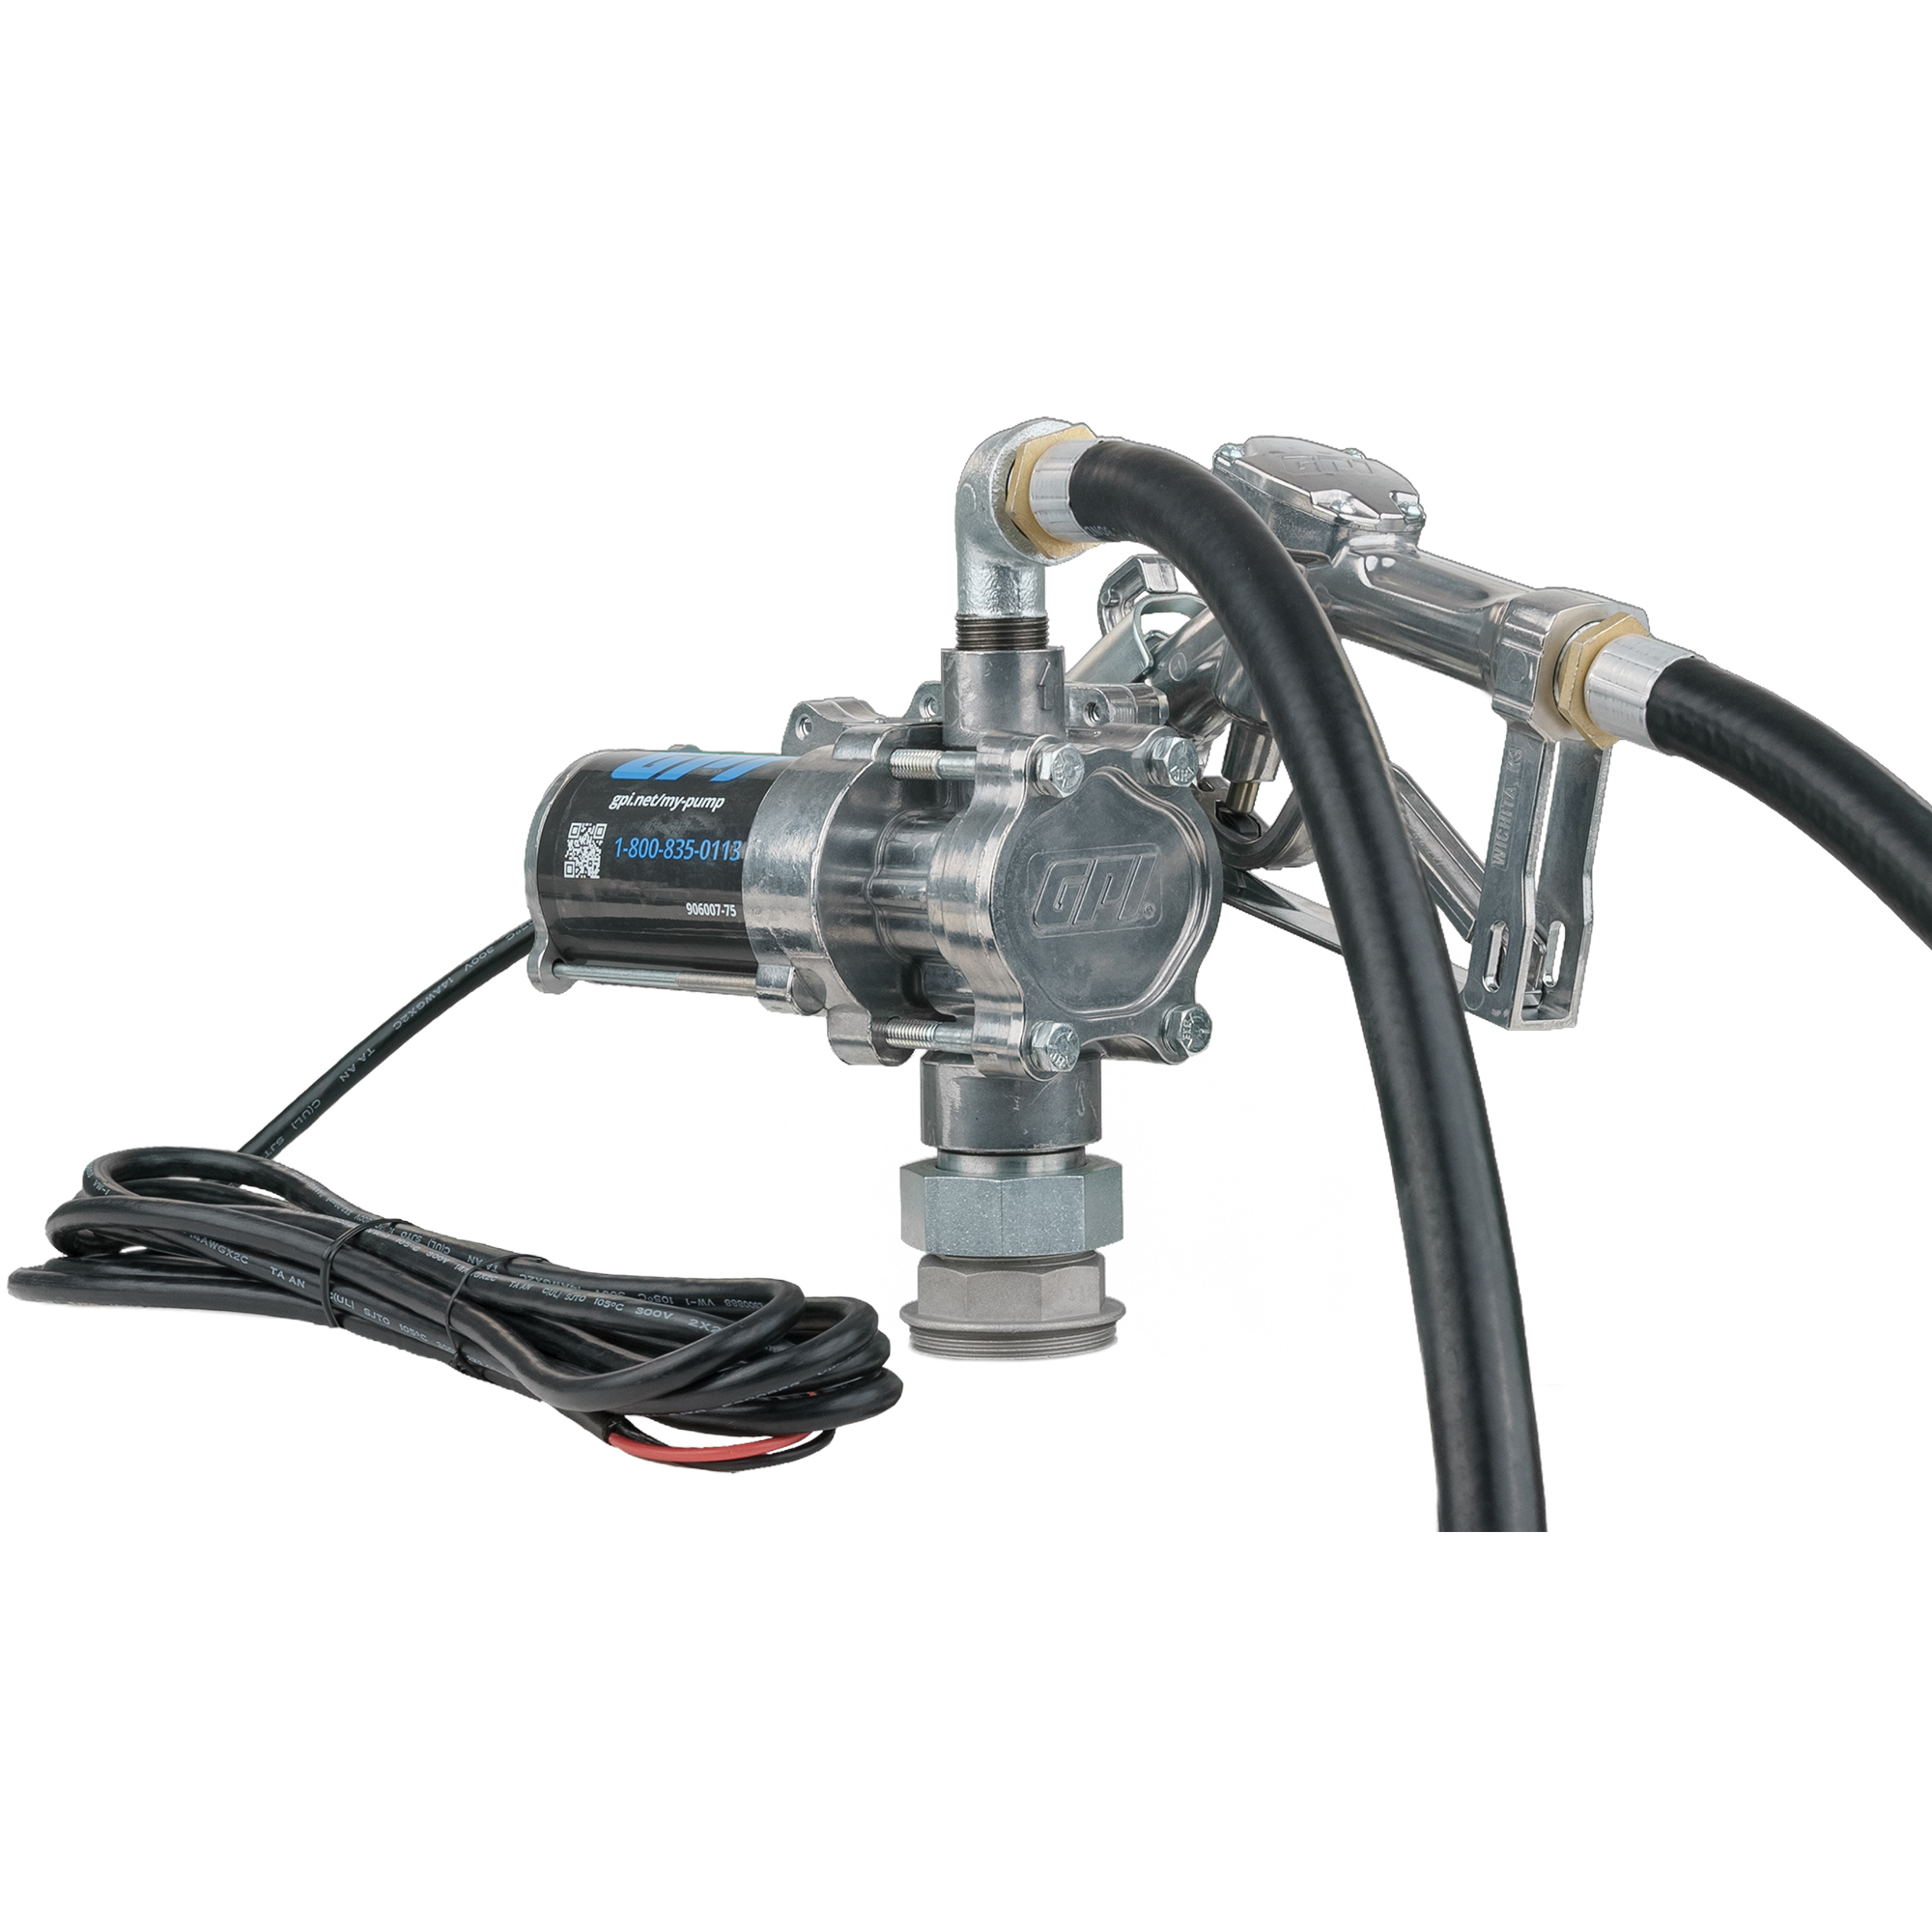 GPI EZ-8 12V Fuel Transfer Pump with Spin Collar, 8 GPM, Ethanol Capable, Manual Nozzle, Hose, Model EZ-8 with Spin Collar